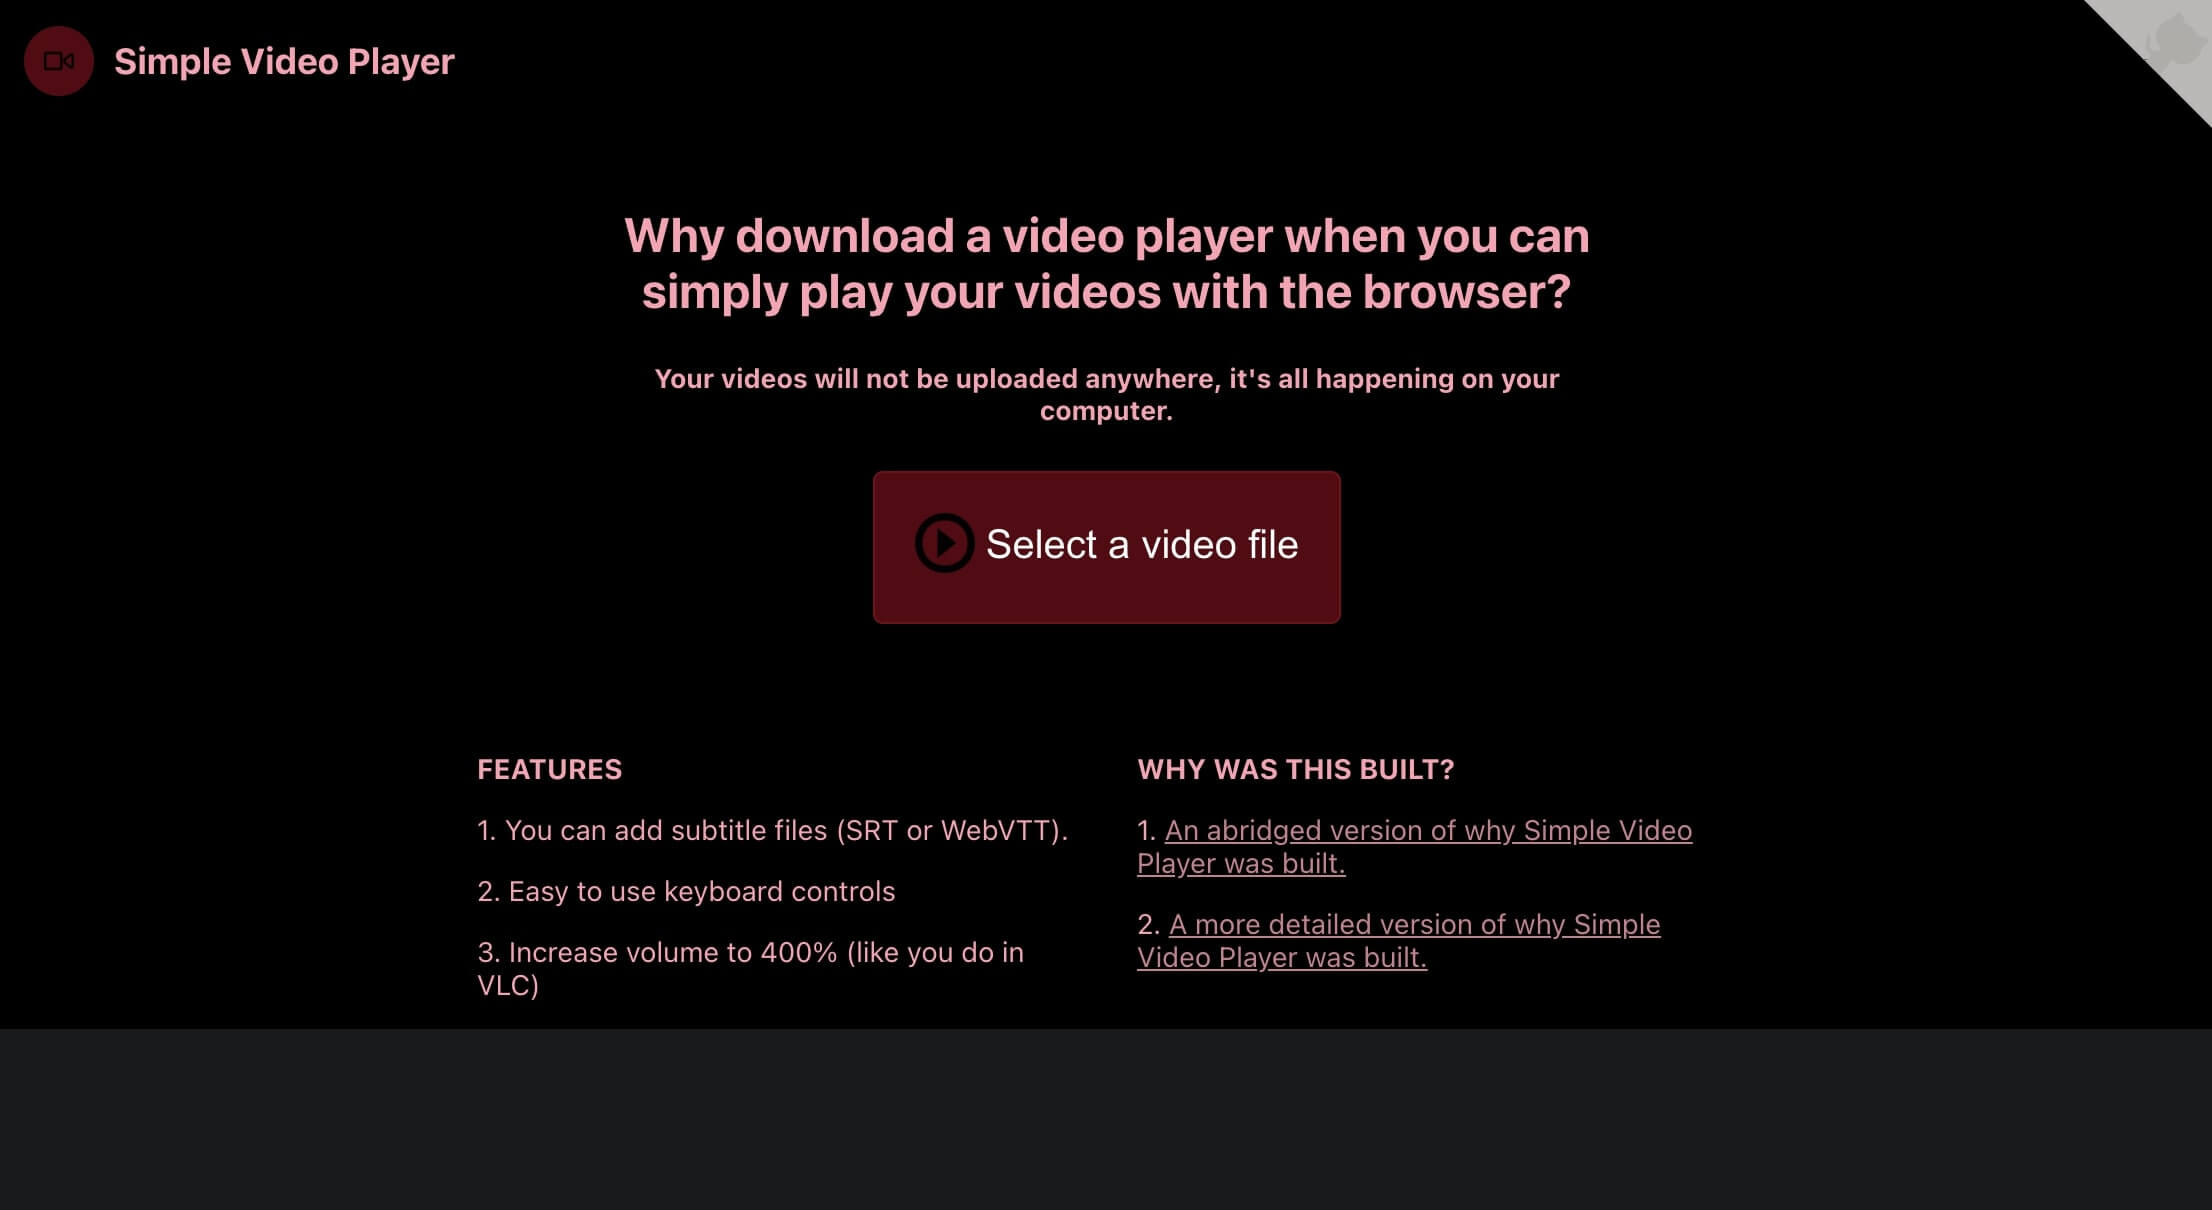   avi-video-player-SimpleVideoPlayer 